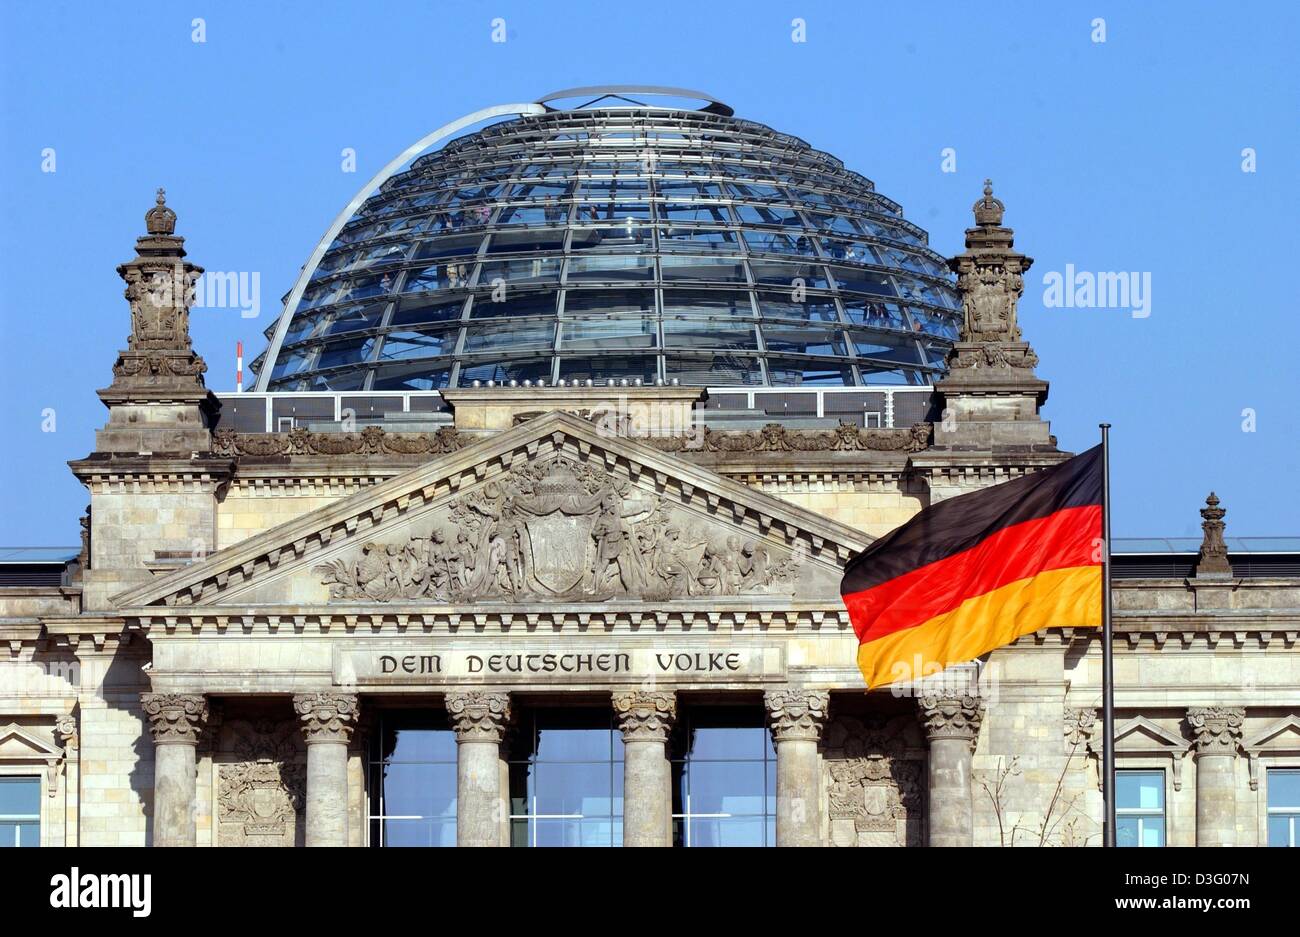 (dpa) - A view of the main portal and the glass cupola of the Reichstag building on a sunny day, in Berlin, 16 March 2003. The text above the columns reads 'Dem Deutschen Volke' (to the German people). Built in 1894 by Paul Wallot, the Reichstag has been accommodating the Bundestag (Lower House of German Parliament) since 19 April 1999. The Italian High Renaissance style building h Stock Photo